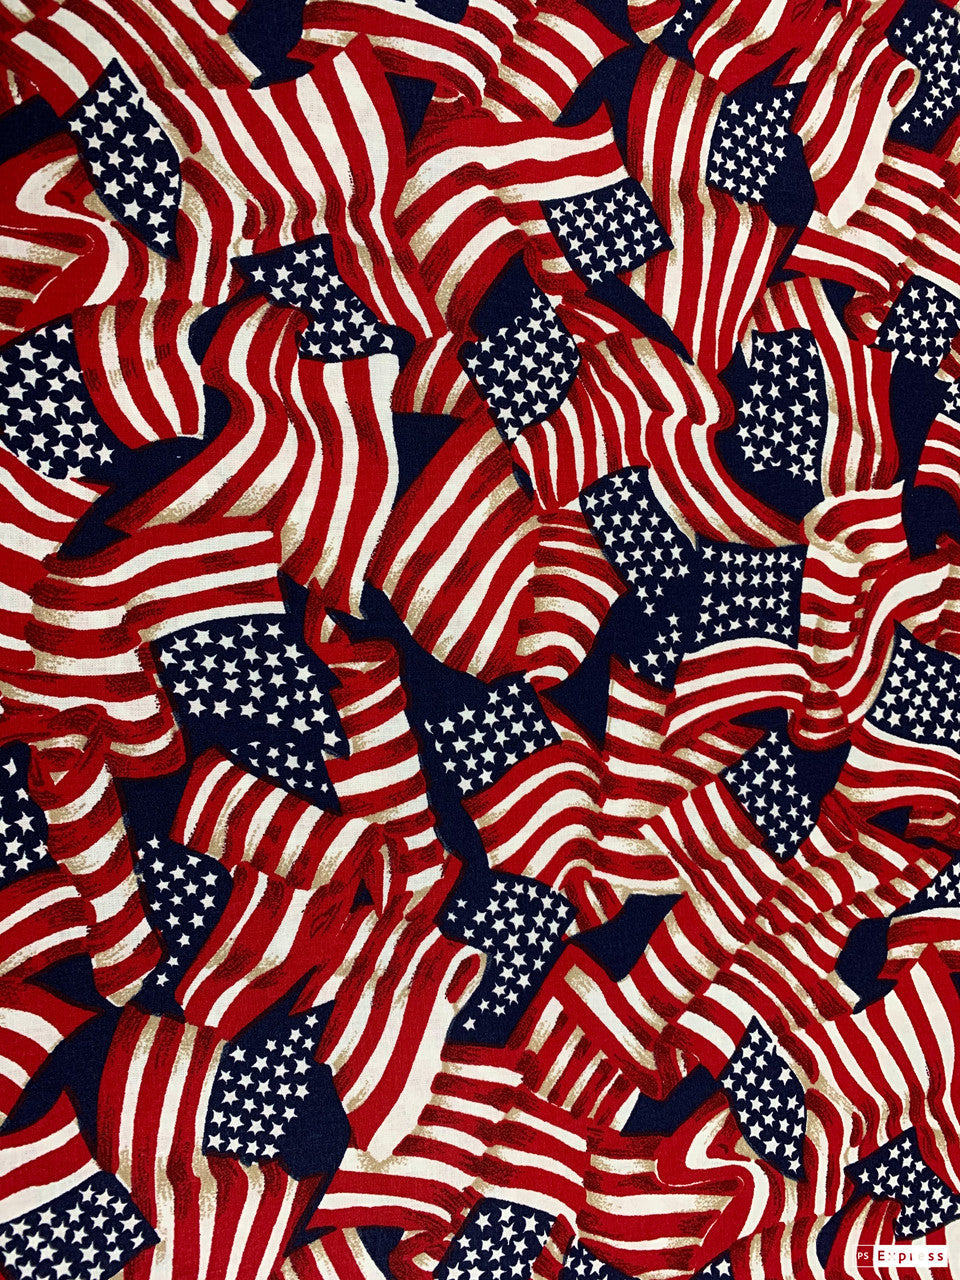 Navy Blue USA flag cotton fabric 41355 Red White Blue patriotic fabric